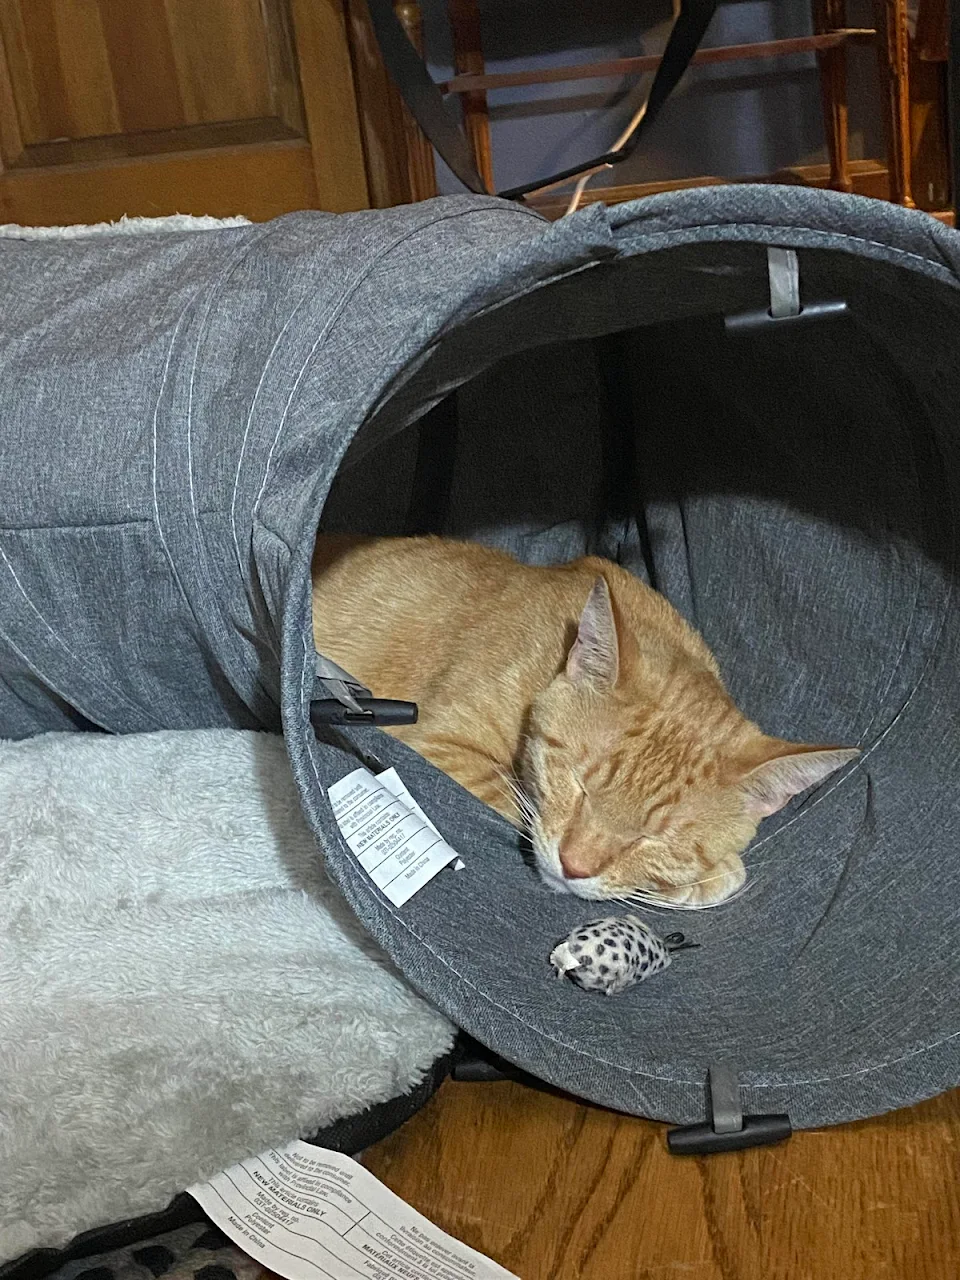 Got my cat a tunnel and she's loving it